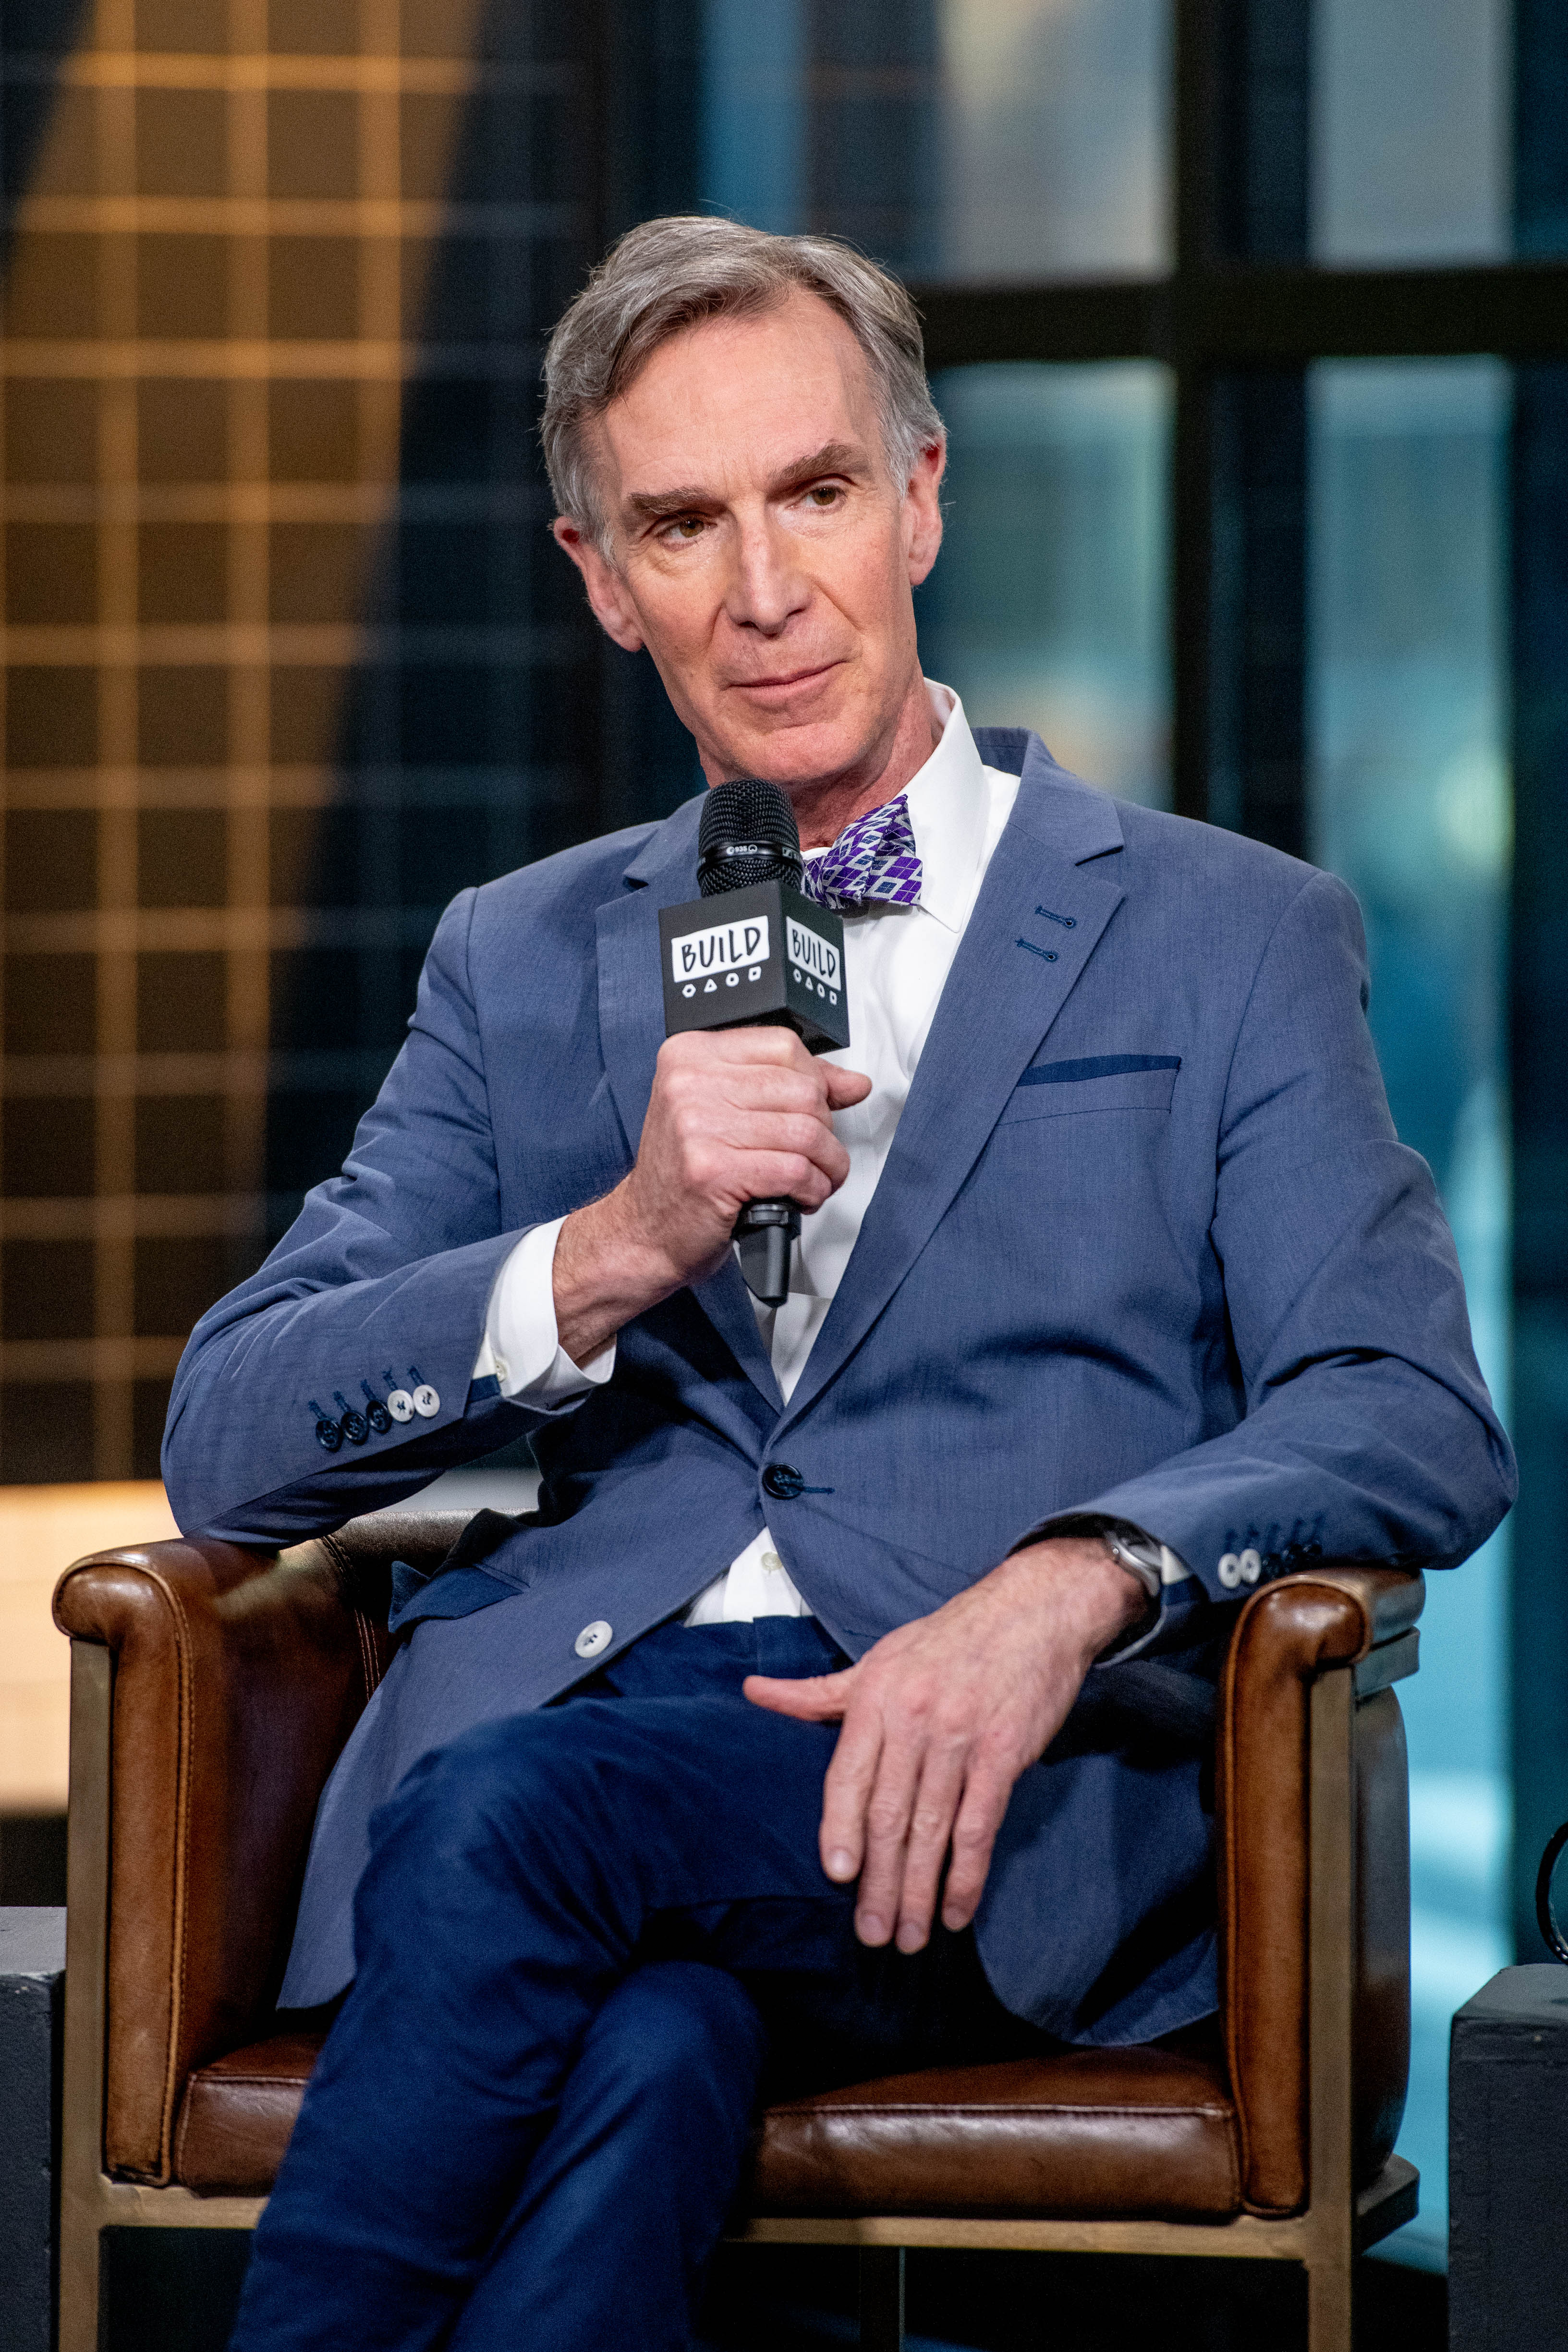 TV host Bill Nye at Build Studio on April 18, 2018 in New York City.  |  Source: Getty Images 